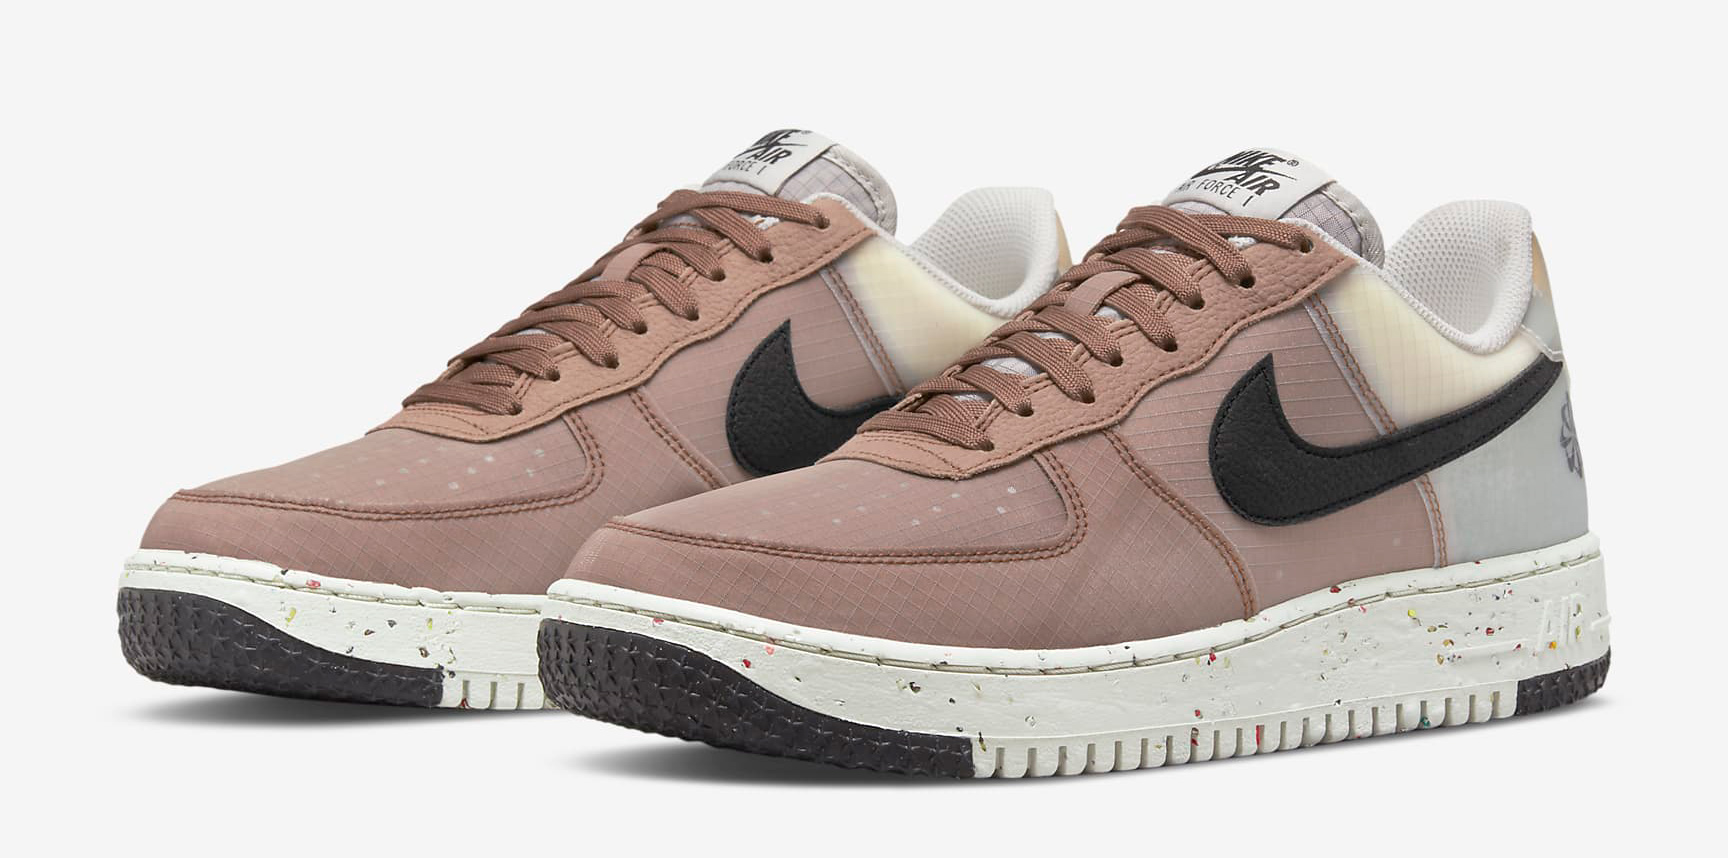 nike-air-force-1-crater-low-archaeo-brown-light-bone-volt-1